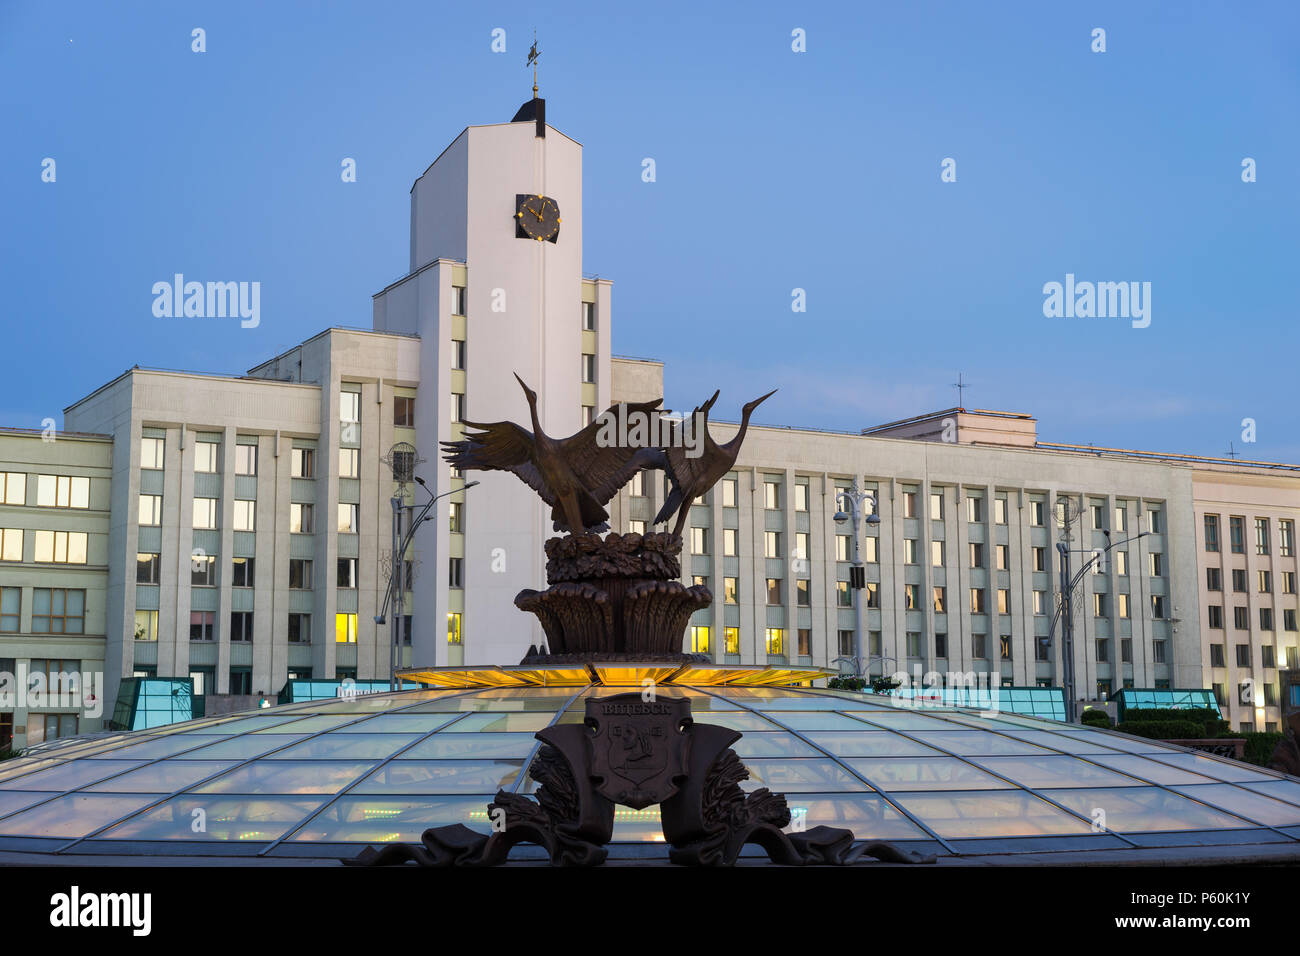 Minsk, Belarus. Famous Independence Square with beautiful sculpture of storks and the building of the Minsk Subway Administration Stock Photo